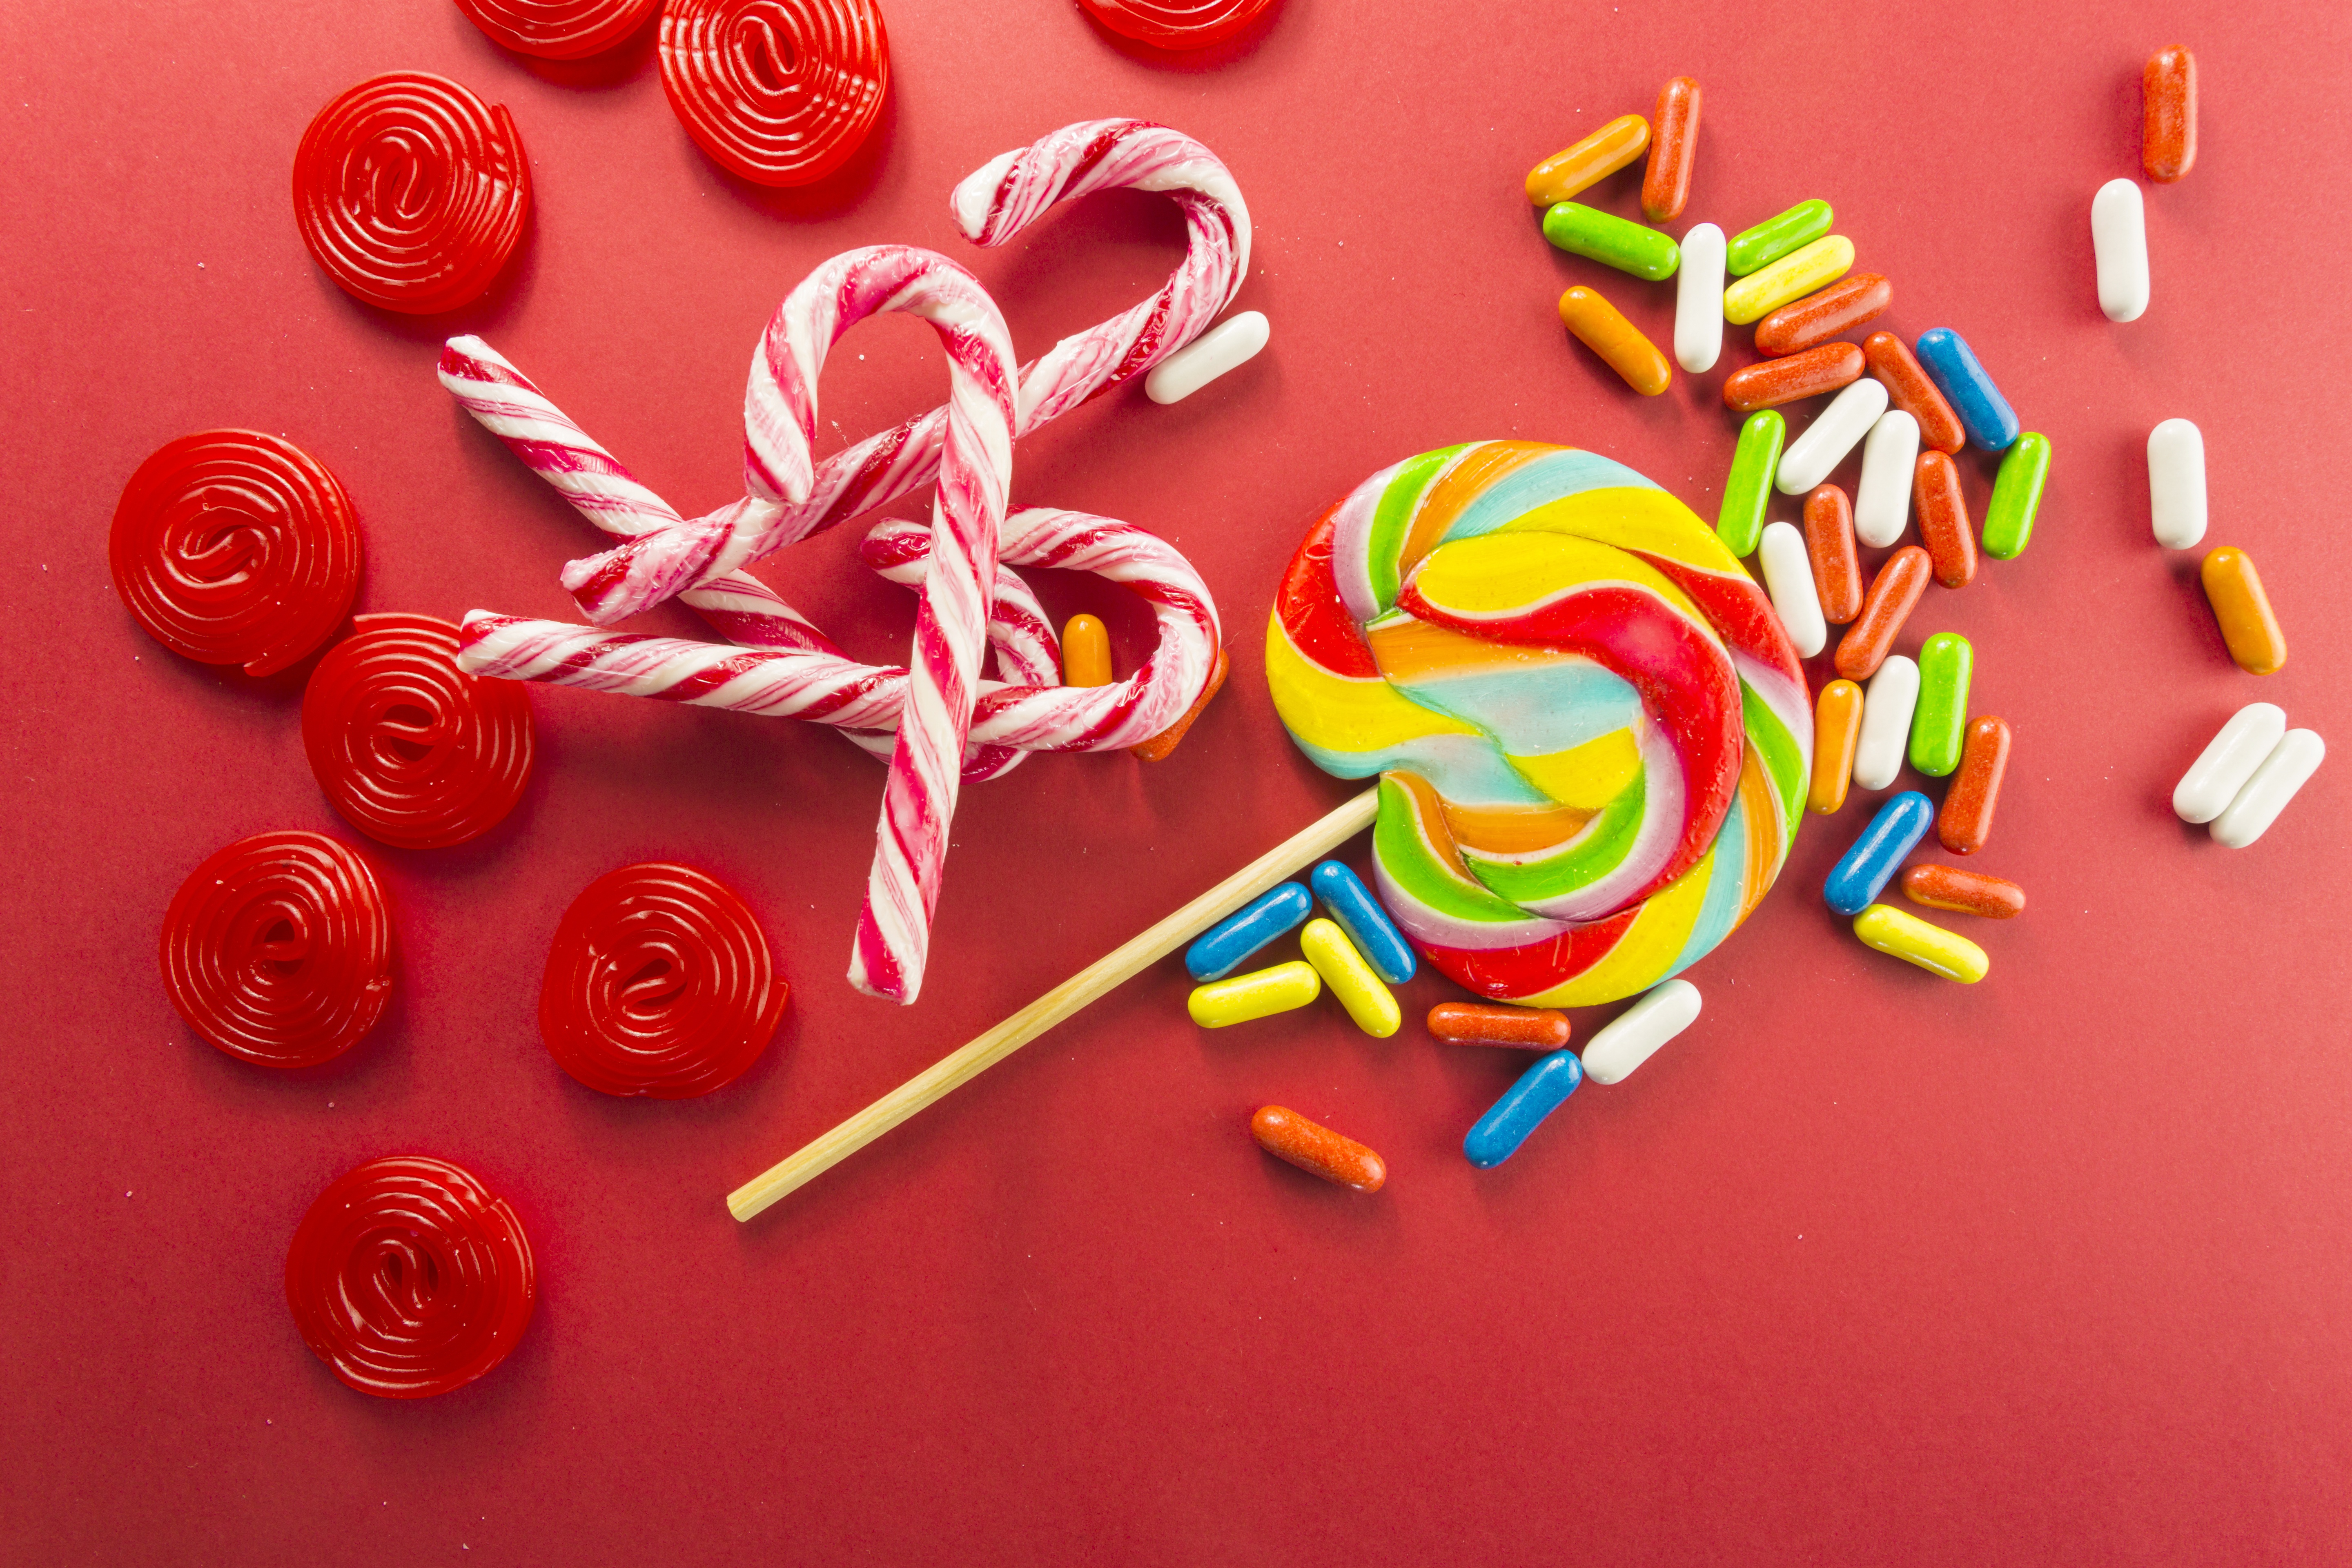 Candy, Sweets, Lollipops. 